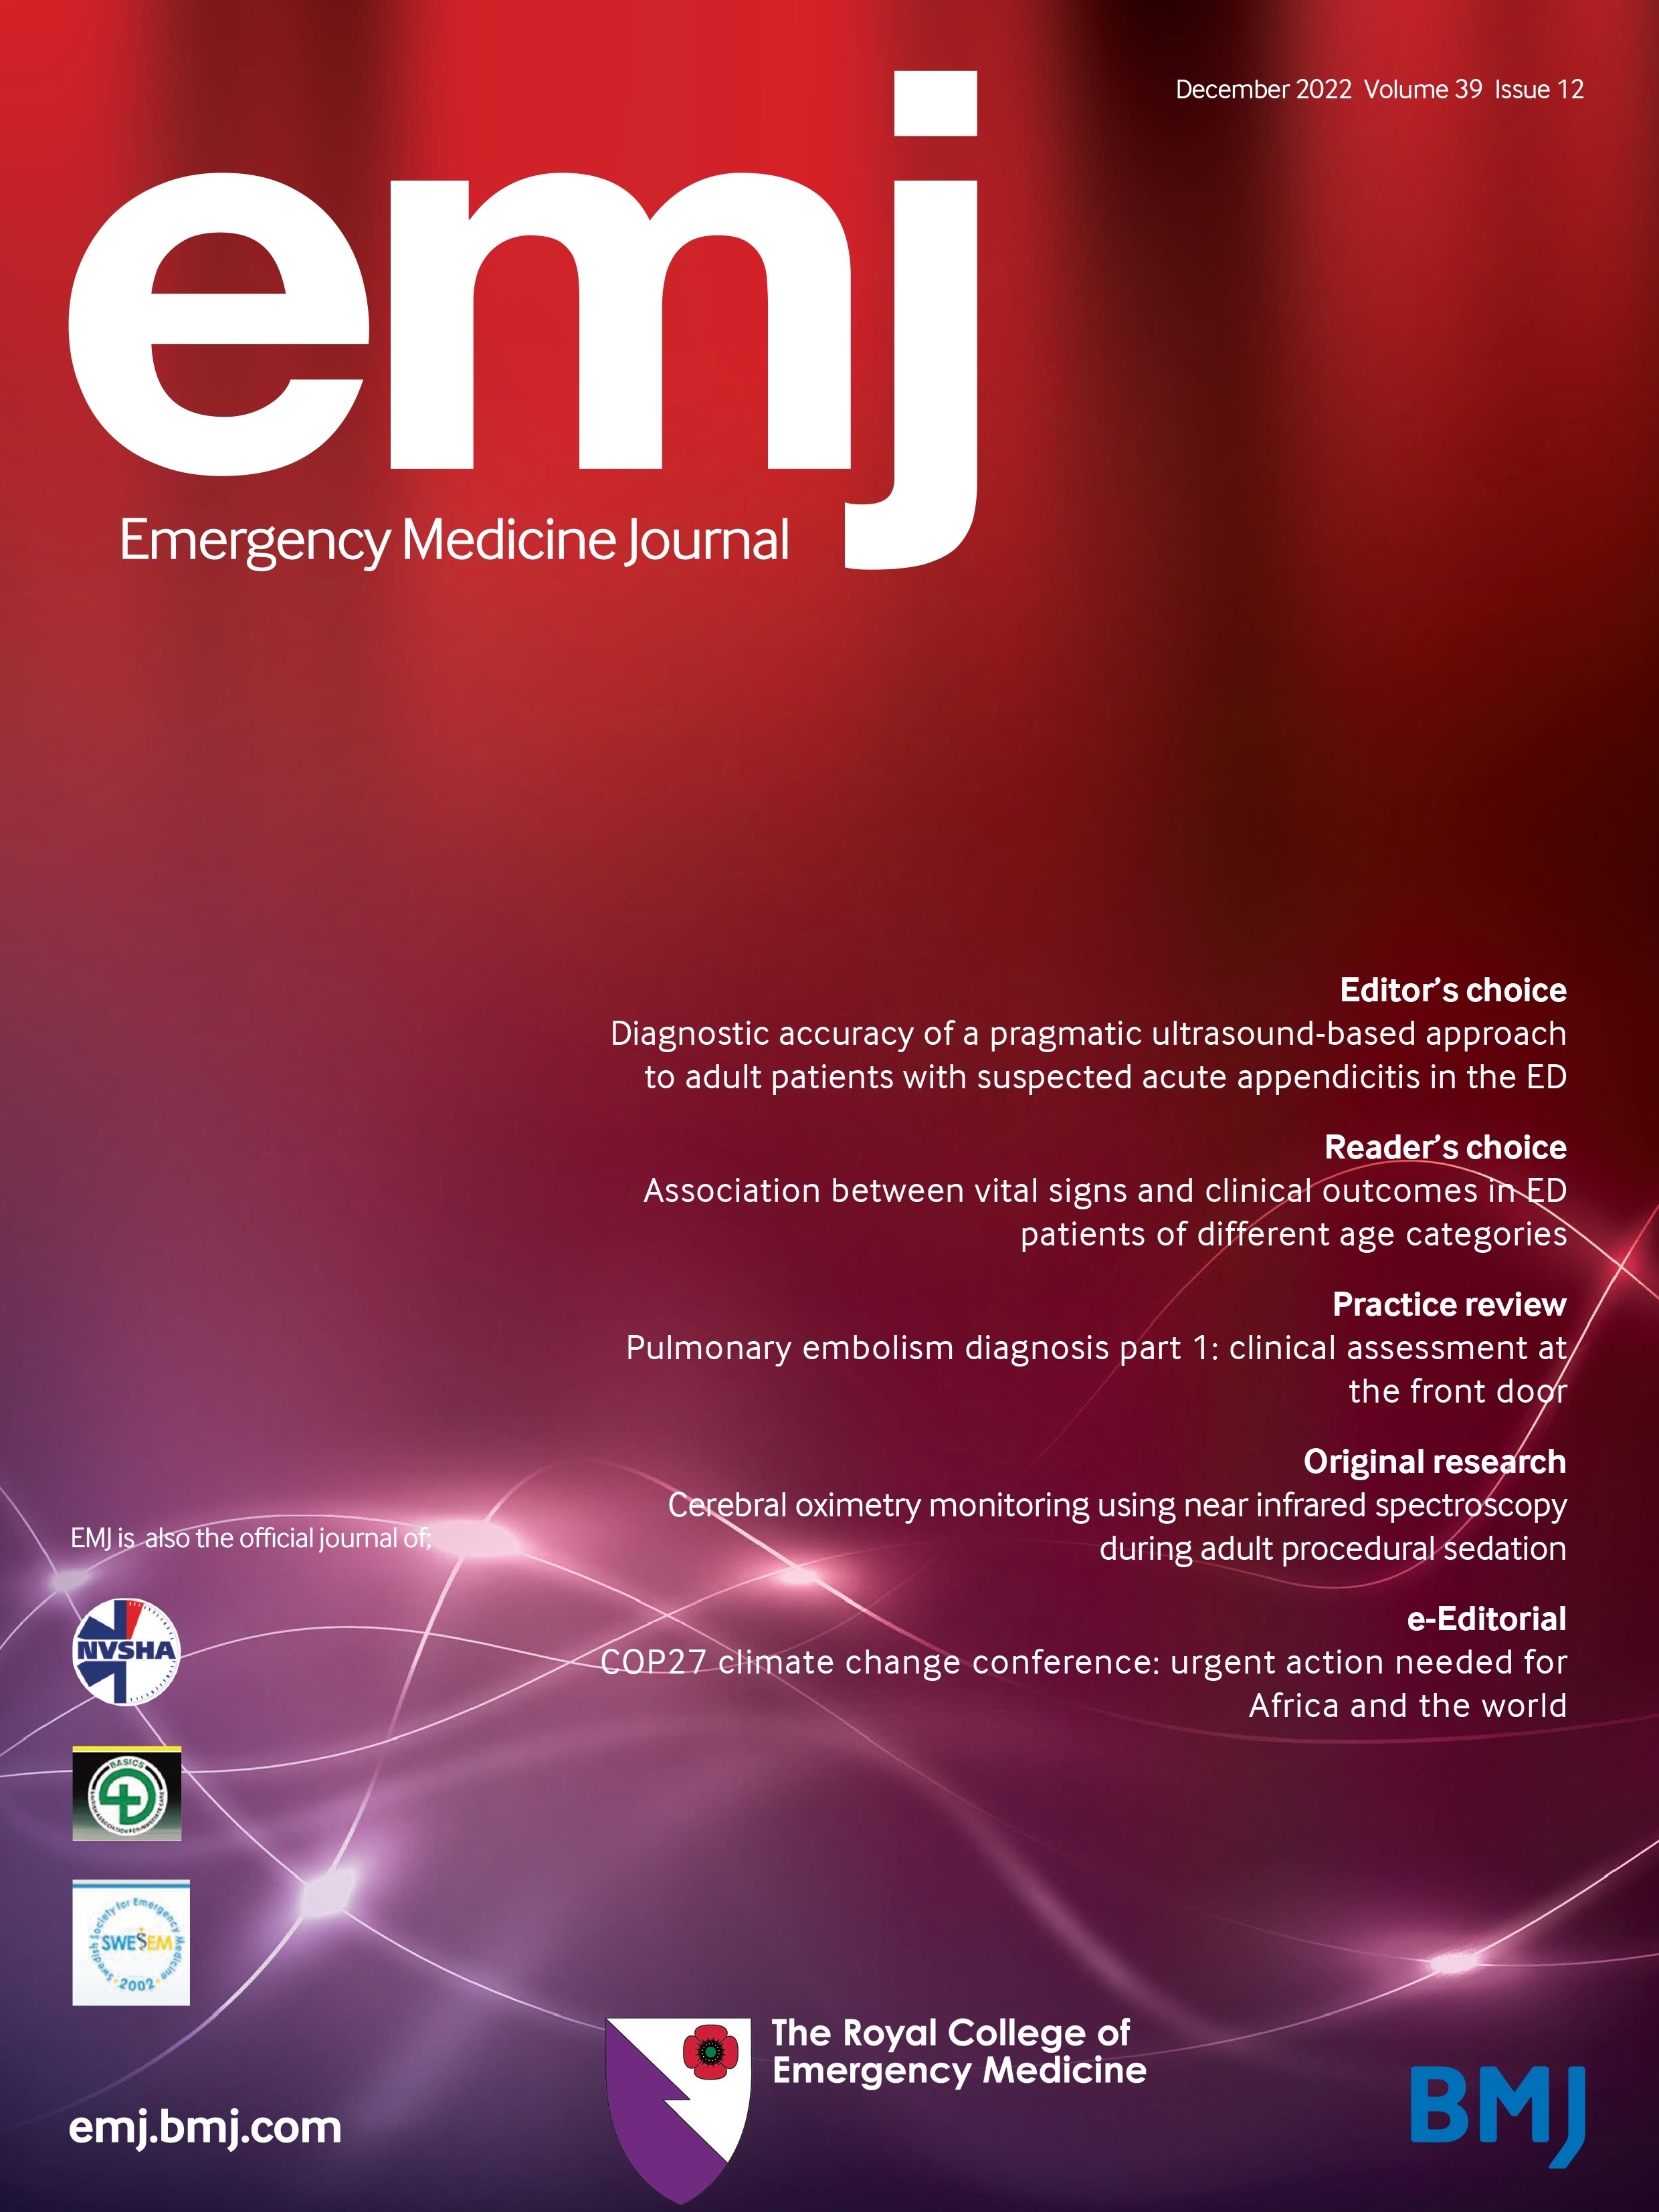 1404 Patients attending the emergency department for blunt thoracic trauma: a validation study of the STUMBL score